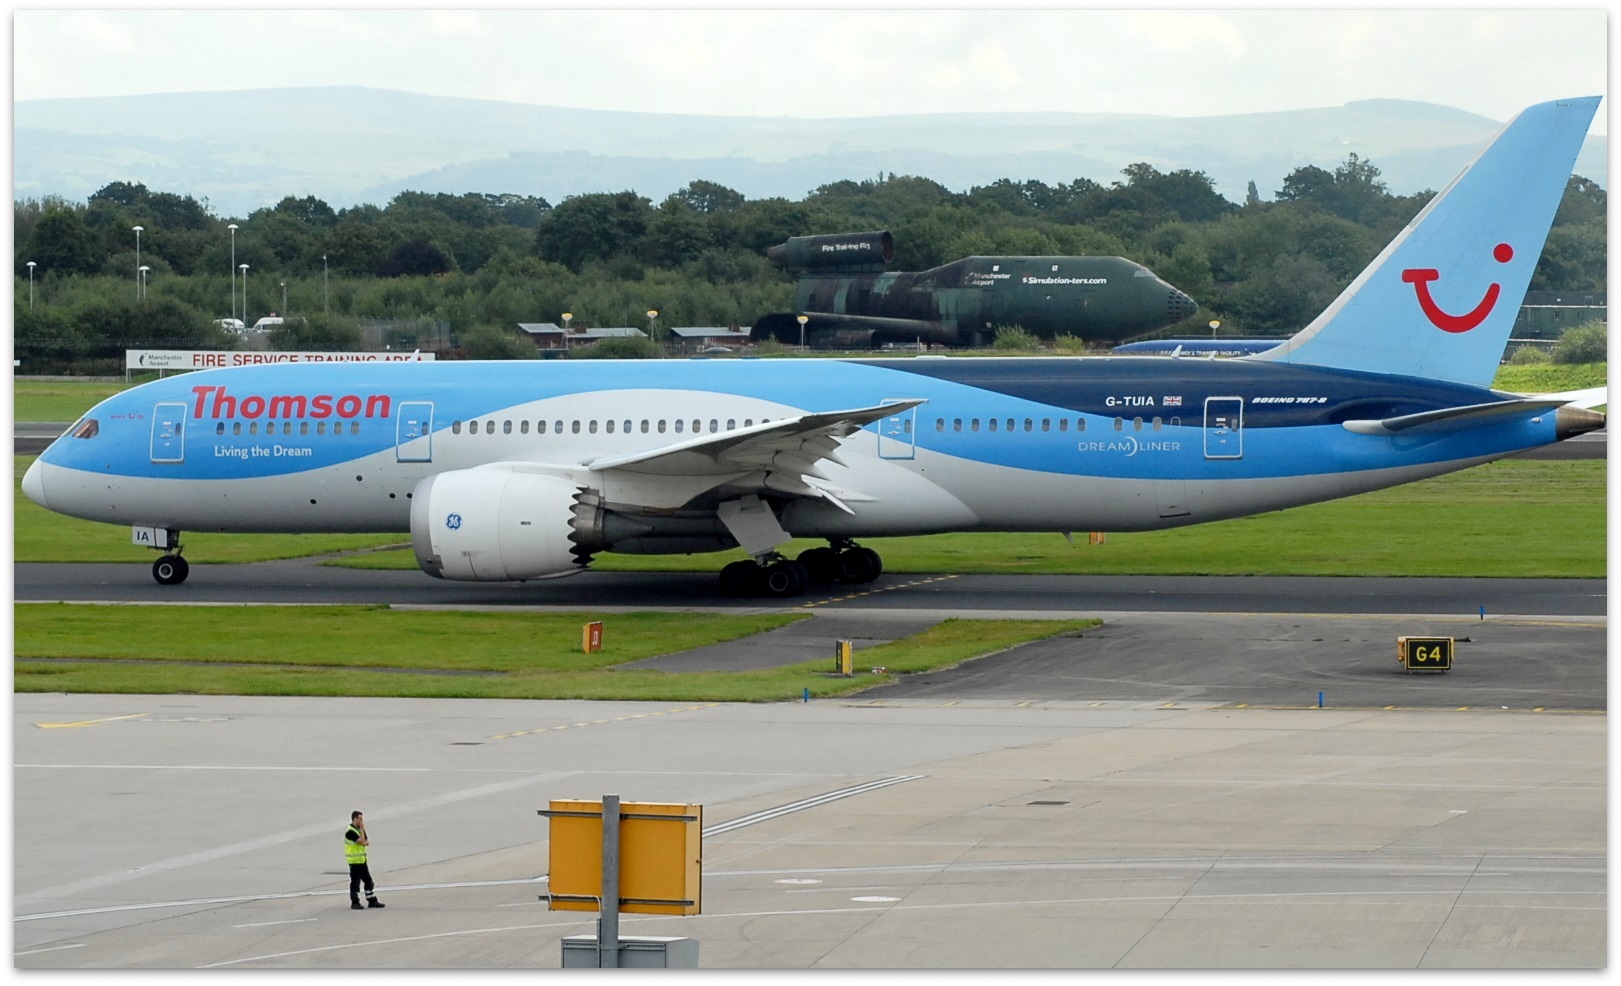 Job Opening Alert - TUI airlines is recruiting for below posts for different bases .